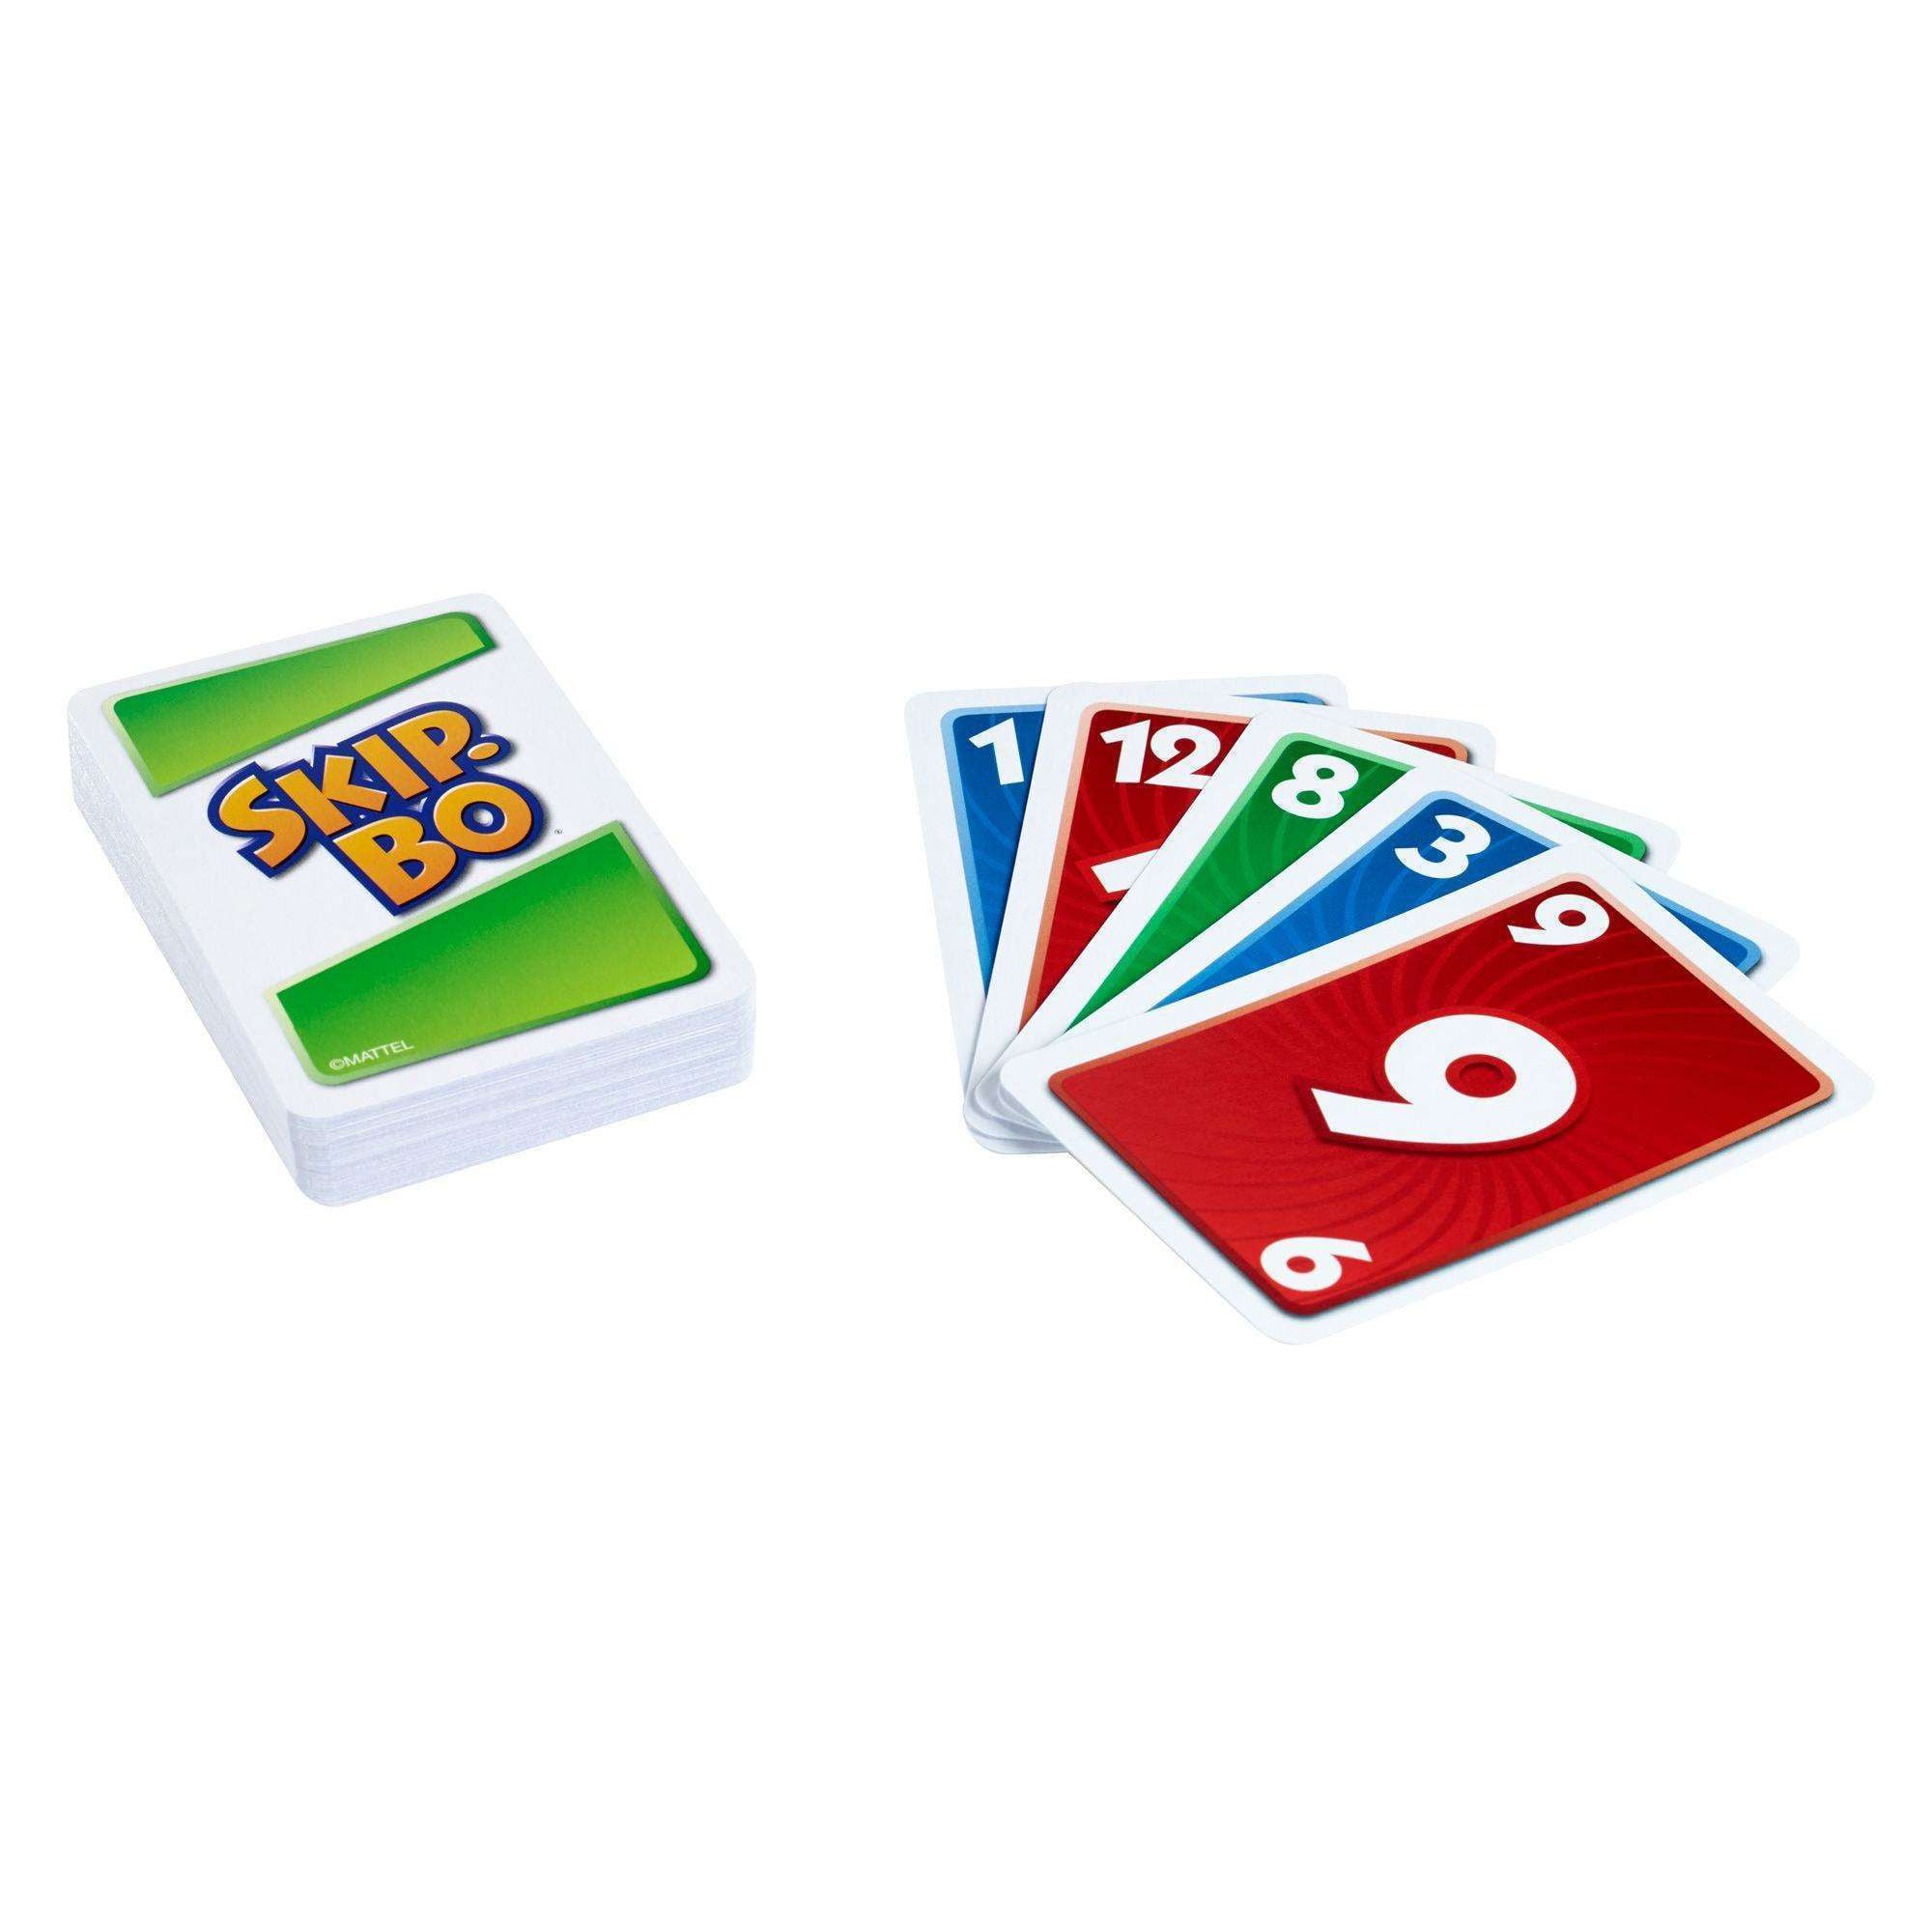 Details about   SKIP BO Card Game 